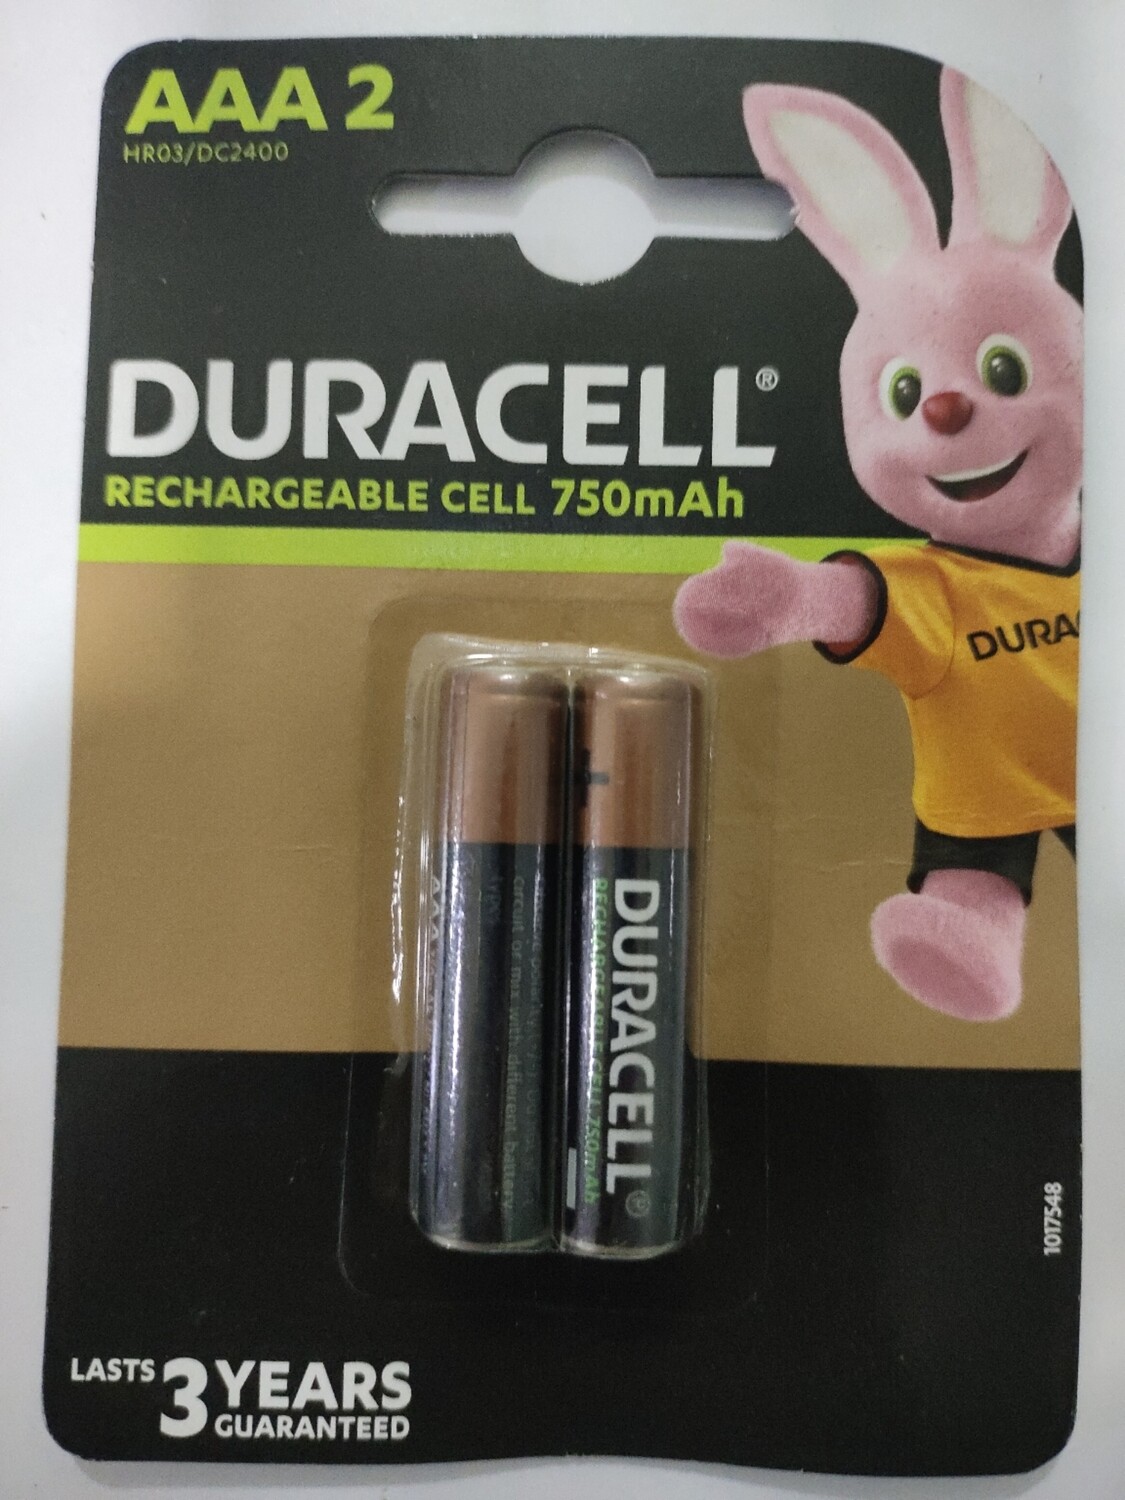 Duracell AAA, 2 Battery, 750mAh, Rechargeable